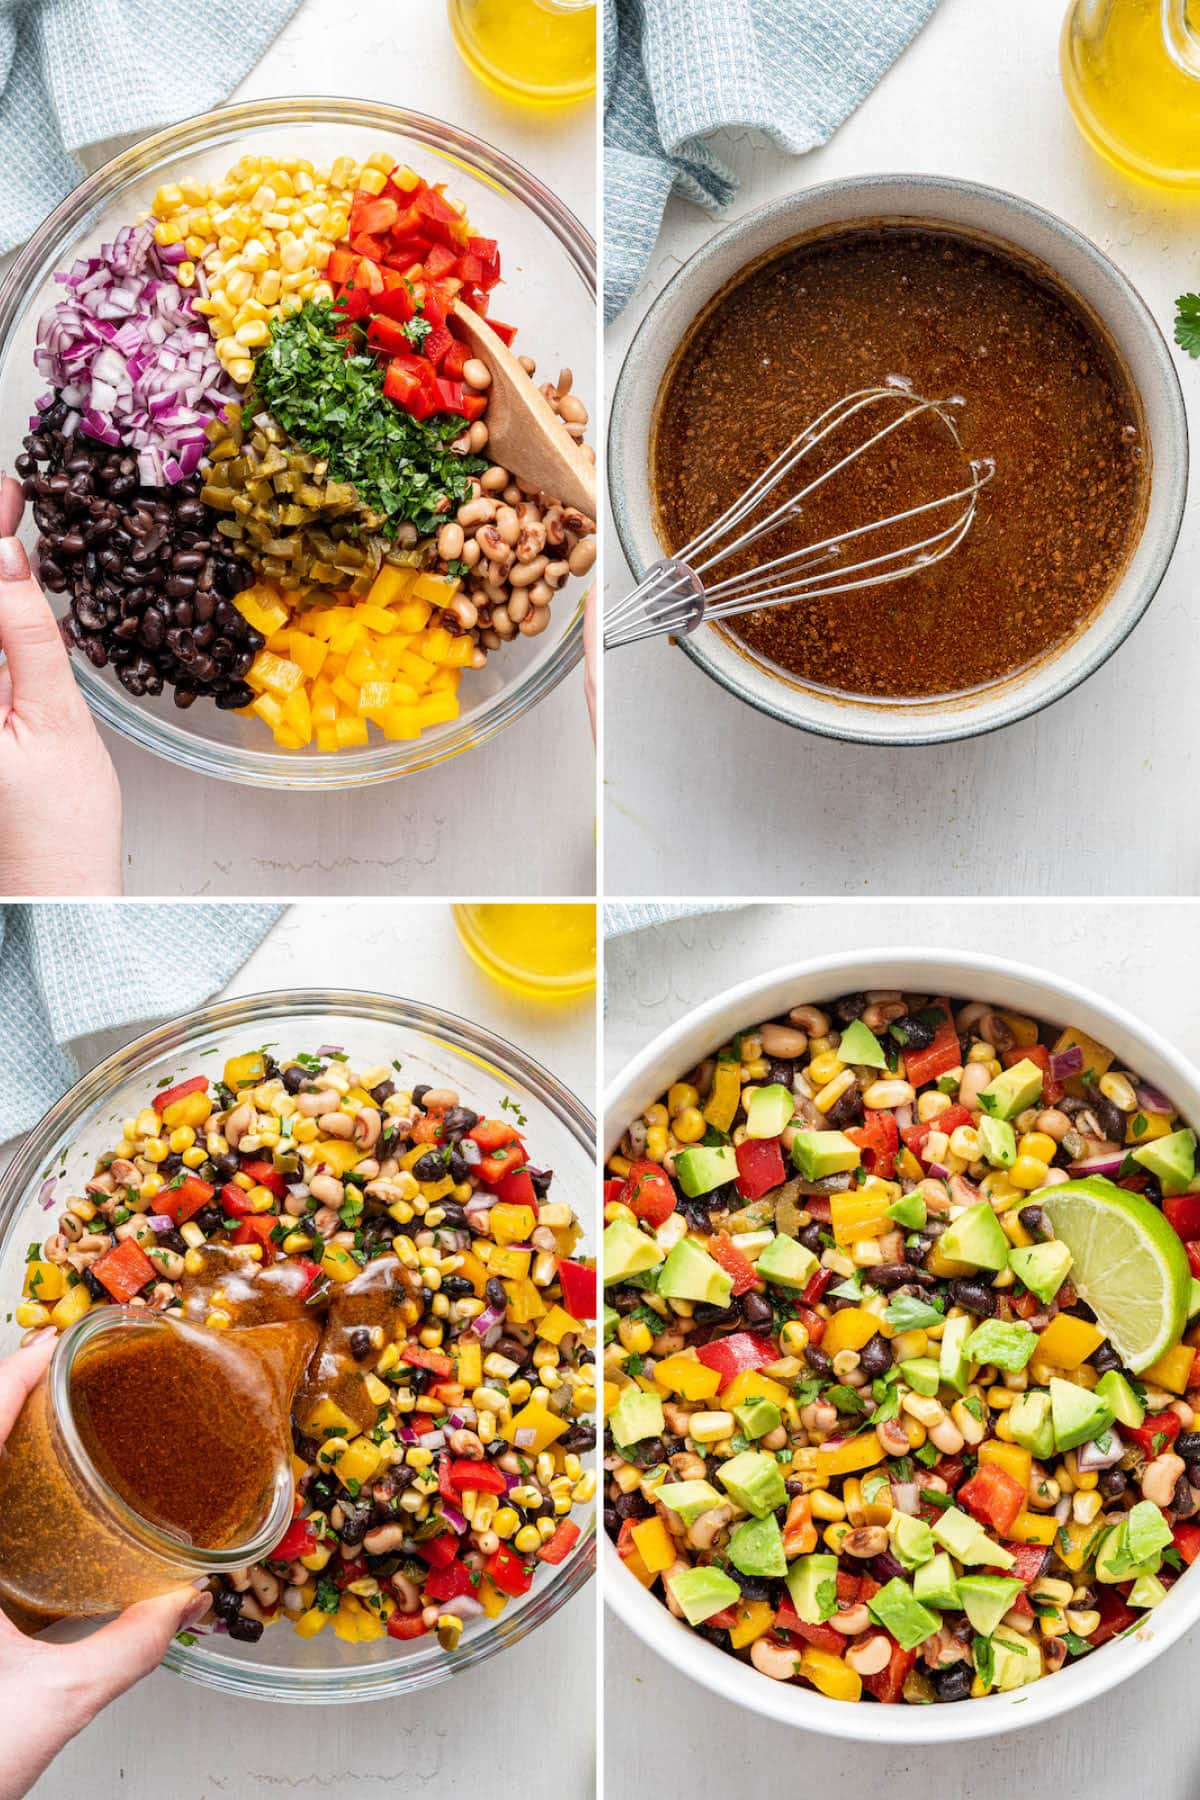 Collage of four photos showing the steps to make Cowboy Caviar: tossing veggies and beans, whisking a dressing, pouring dressing on Cowboy Caviar and then garnishing with avocado, cilantro and lime.